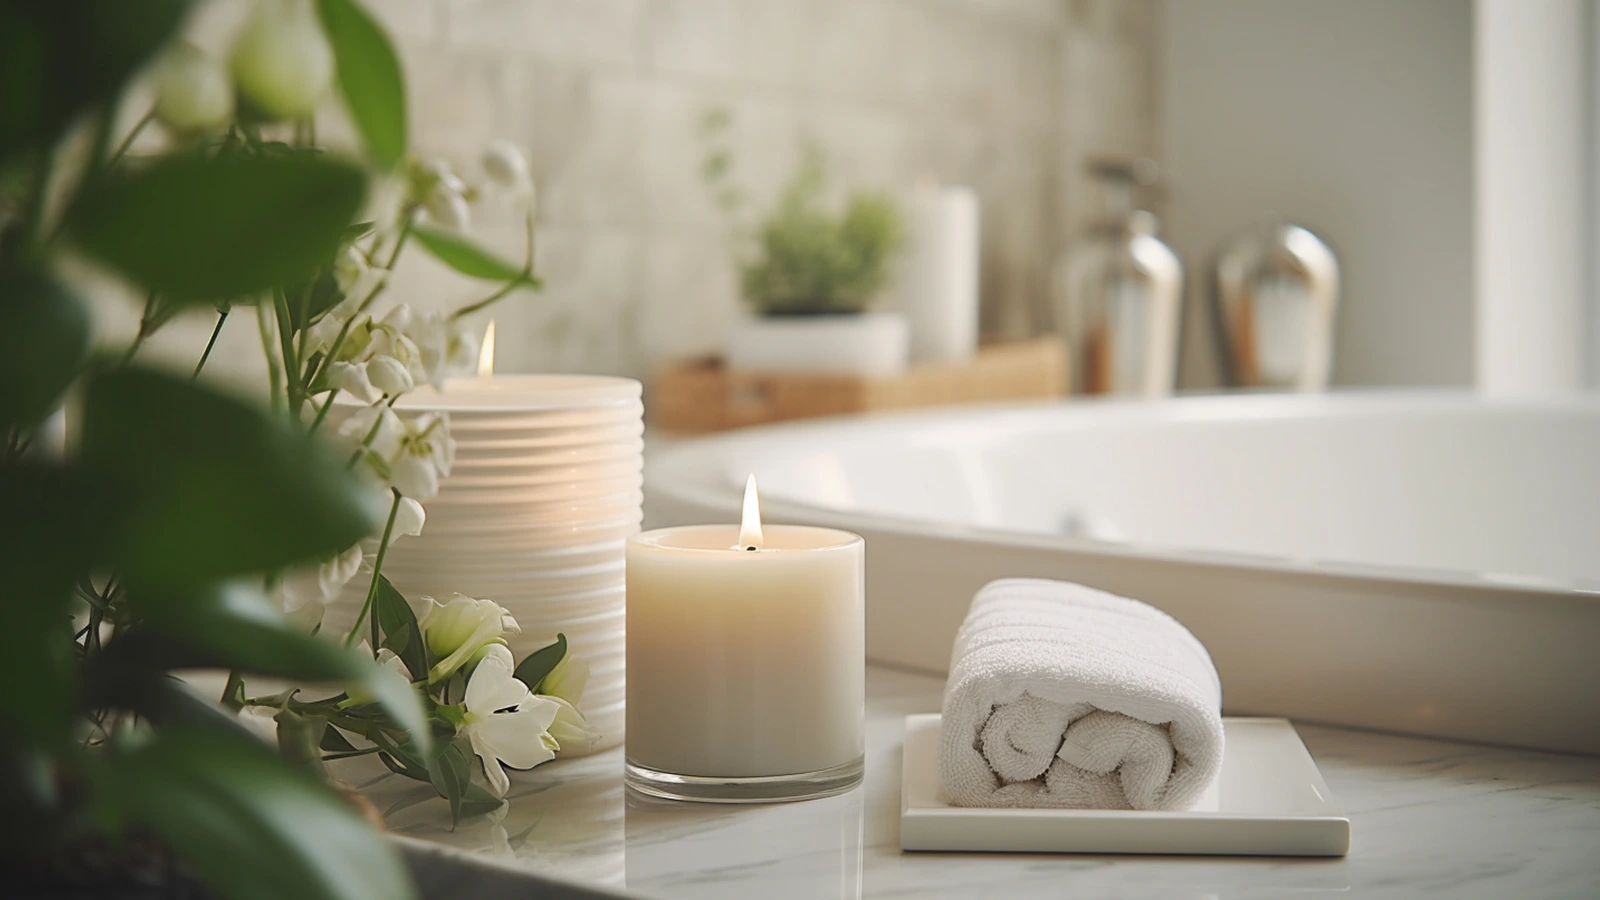 Learn how to decorate an apartment bathroom with candles, towels, and plants.